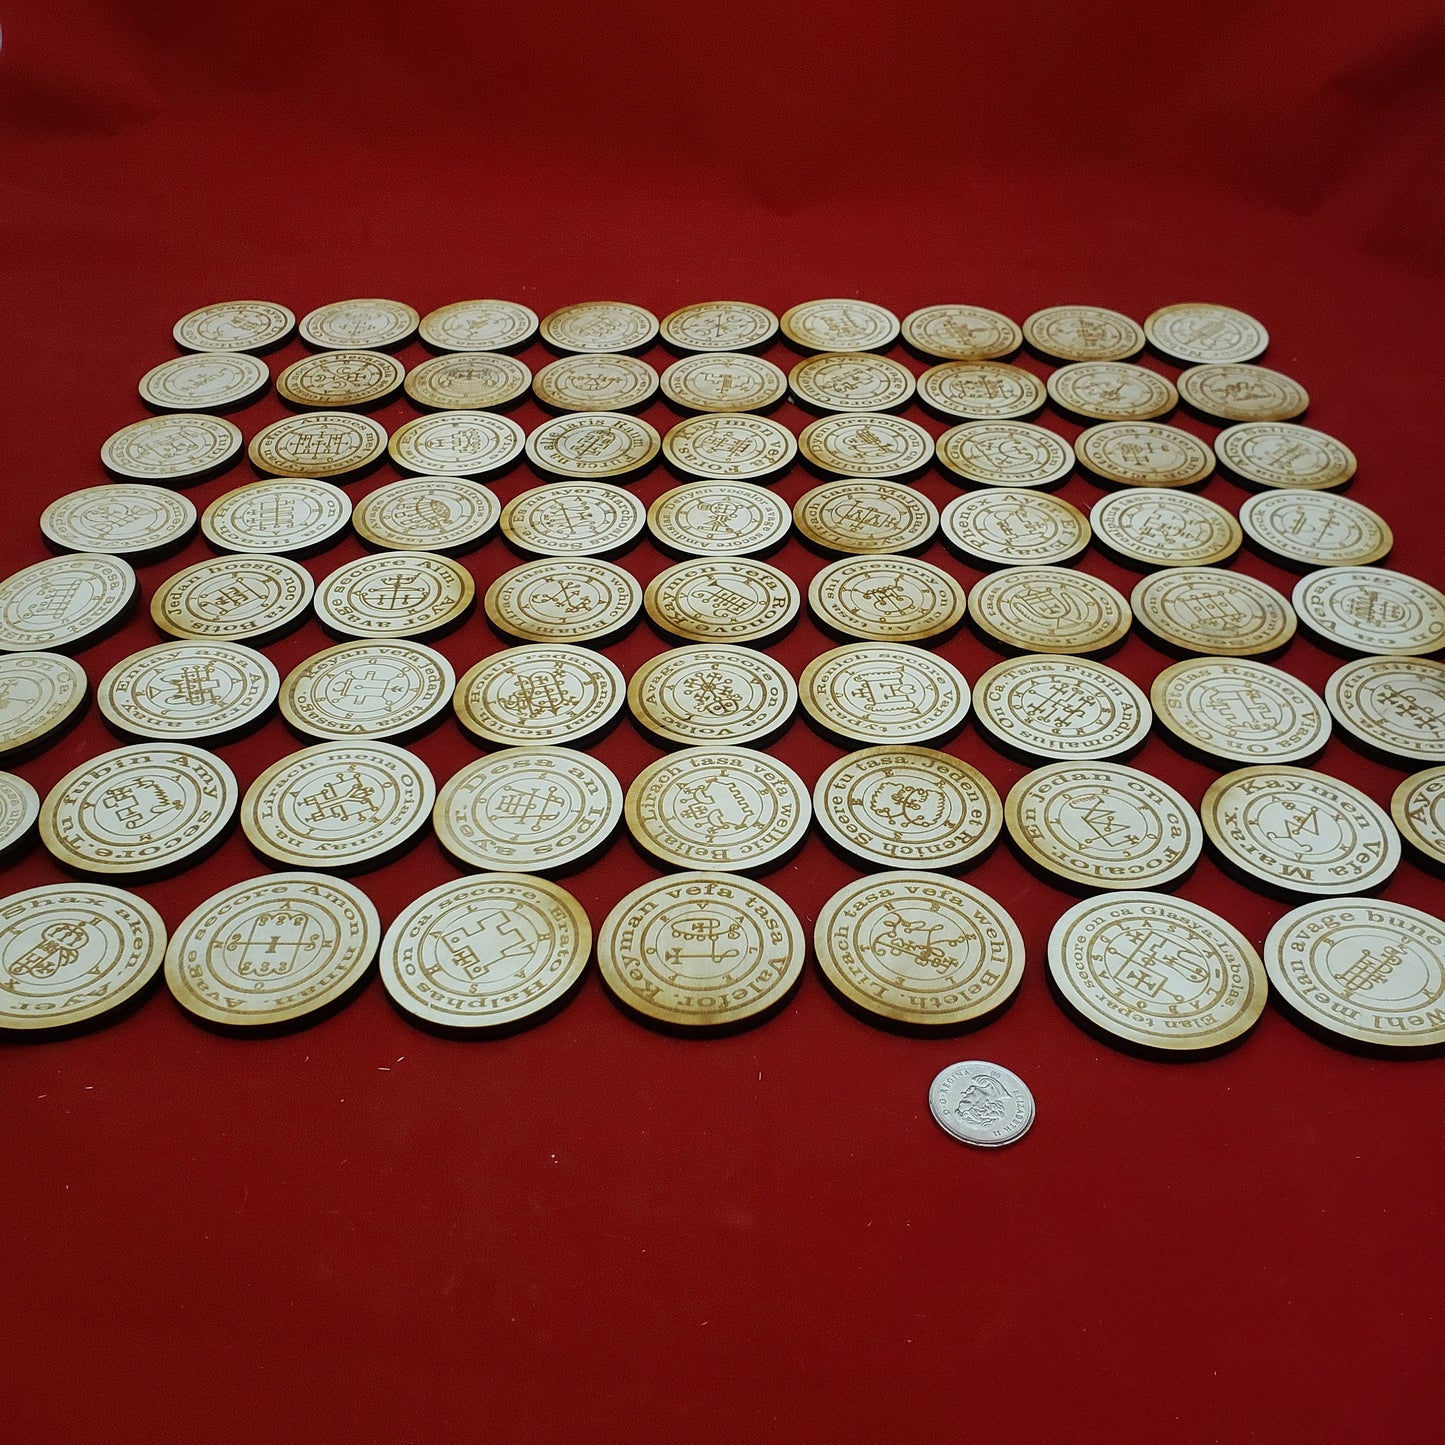 Full set of 72 goetia seals with enns - North Witch Magick Co.